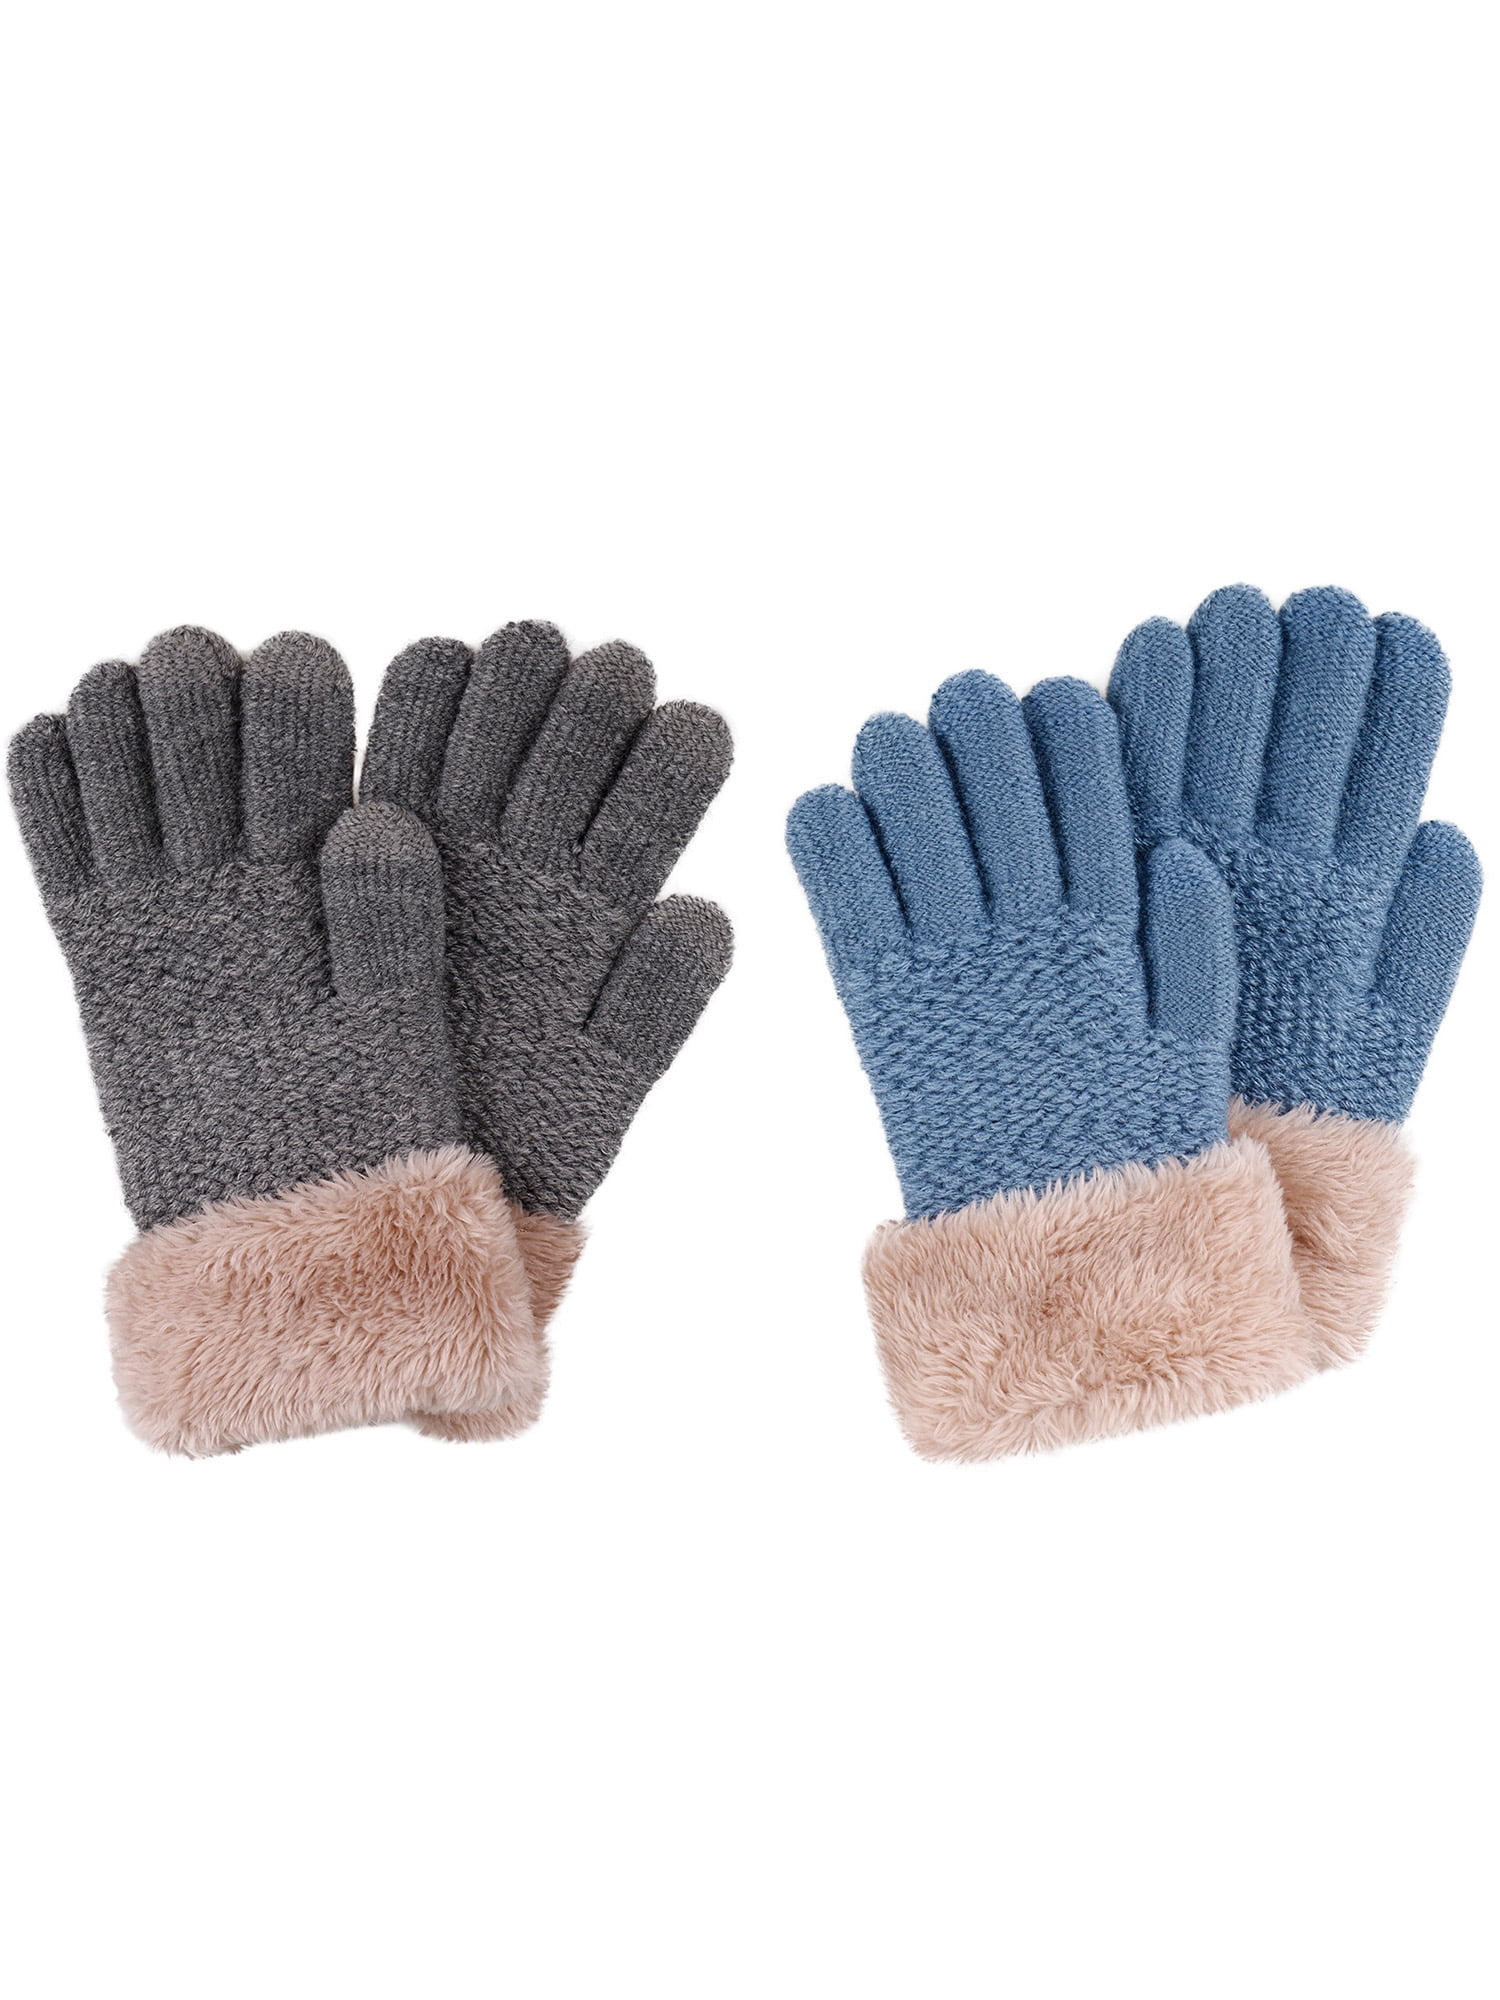 Kids 2 Pack Thermal Knitted Gloves Thinsulate Quality Knit Lined Glove